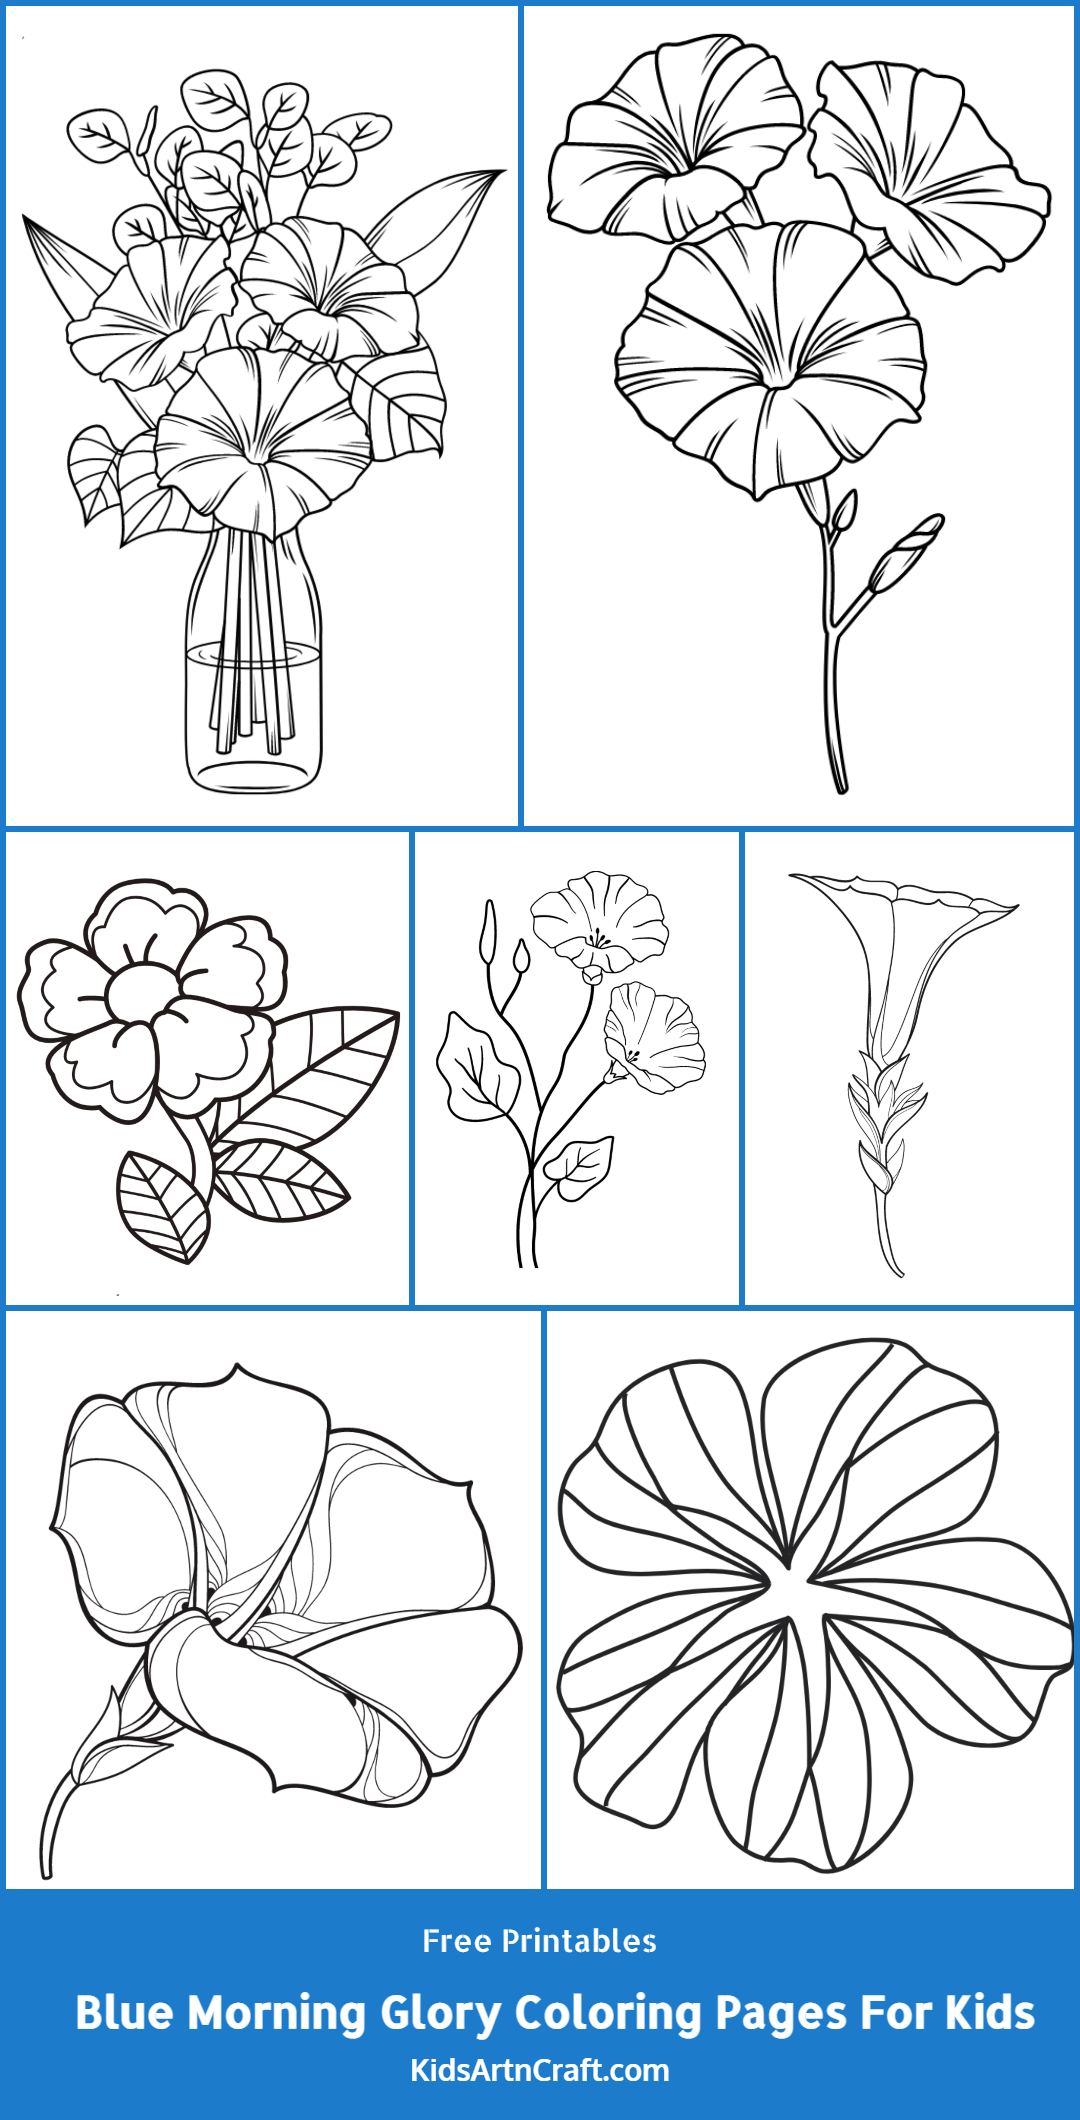 Blue Morning Glory Coloring Pages For Kids – Free Printables